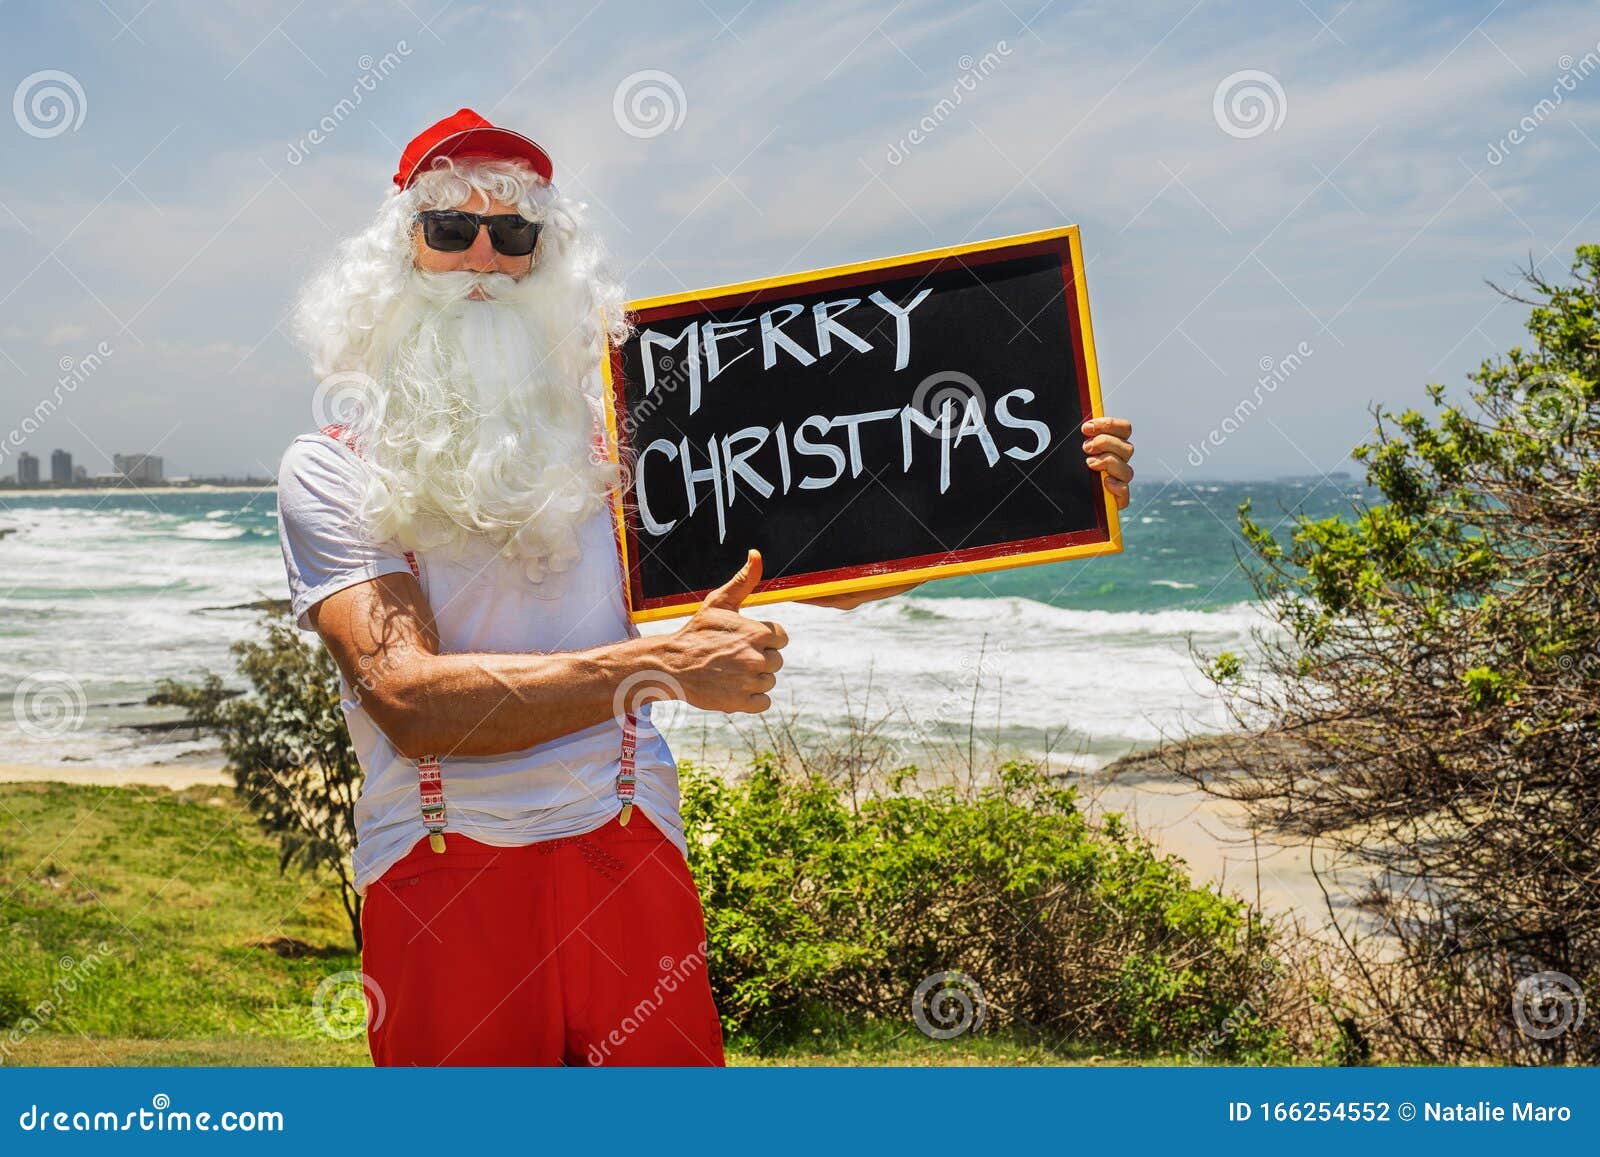 Santa Claus Holds Gift Boxes with the Ocean on Backgraund Photo - of beach, travel: 166254552